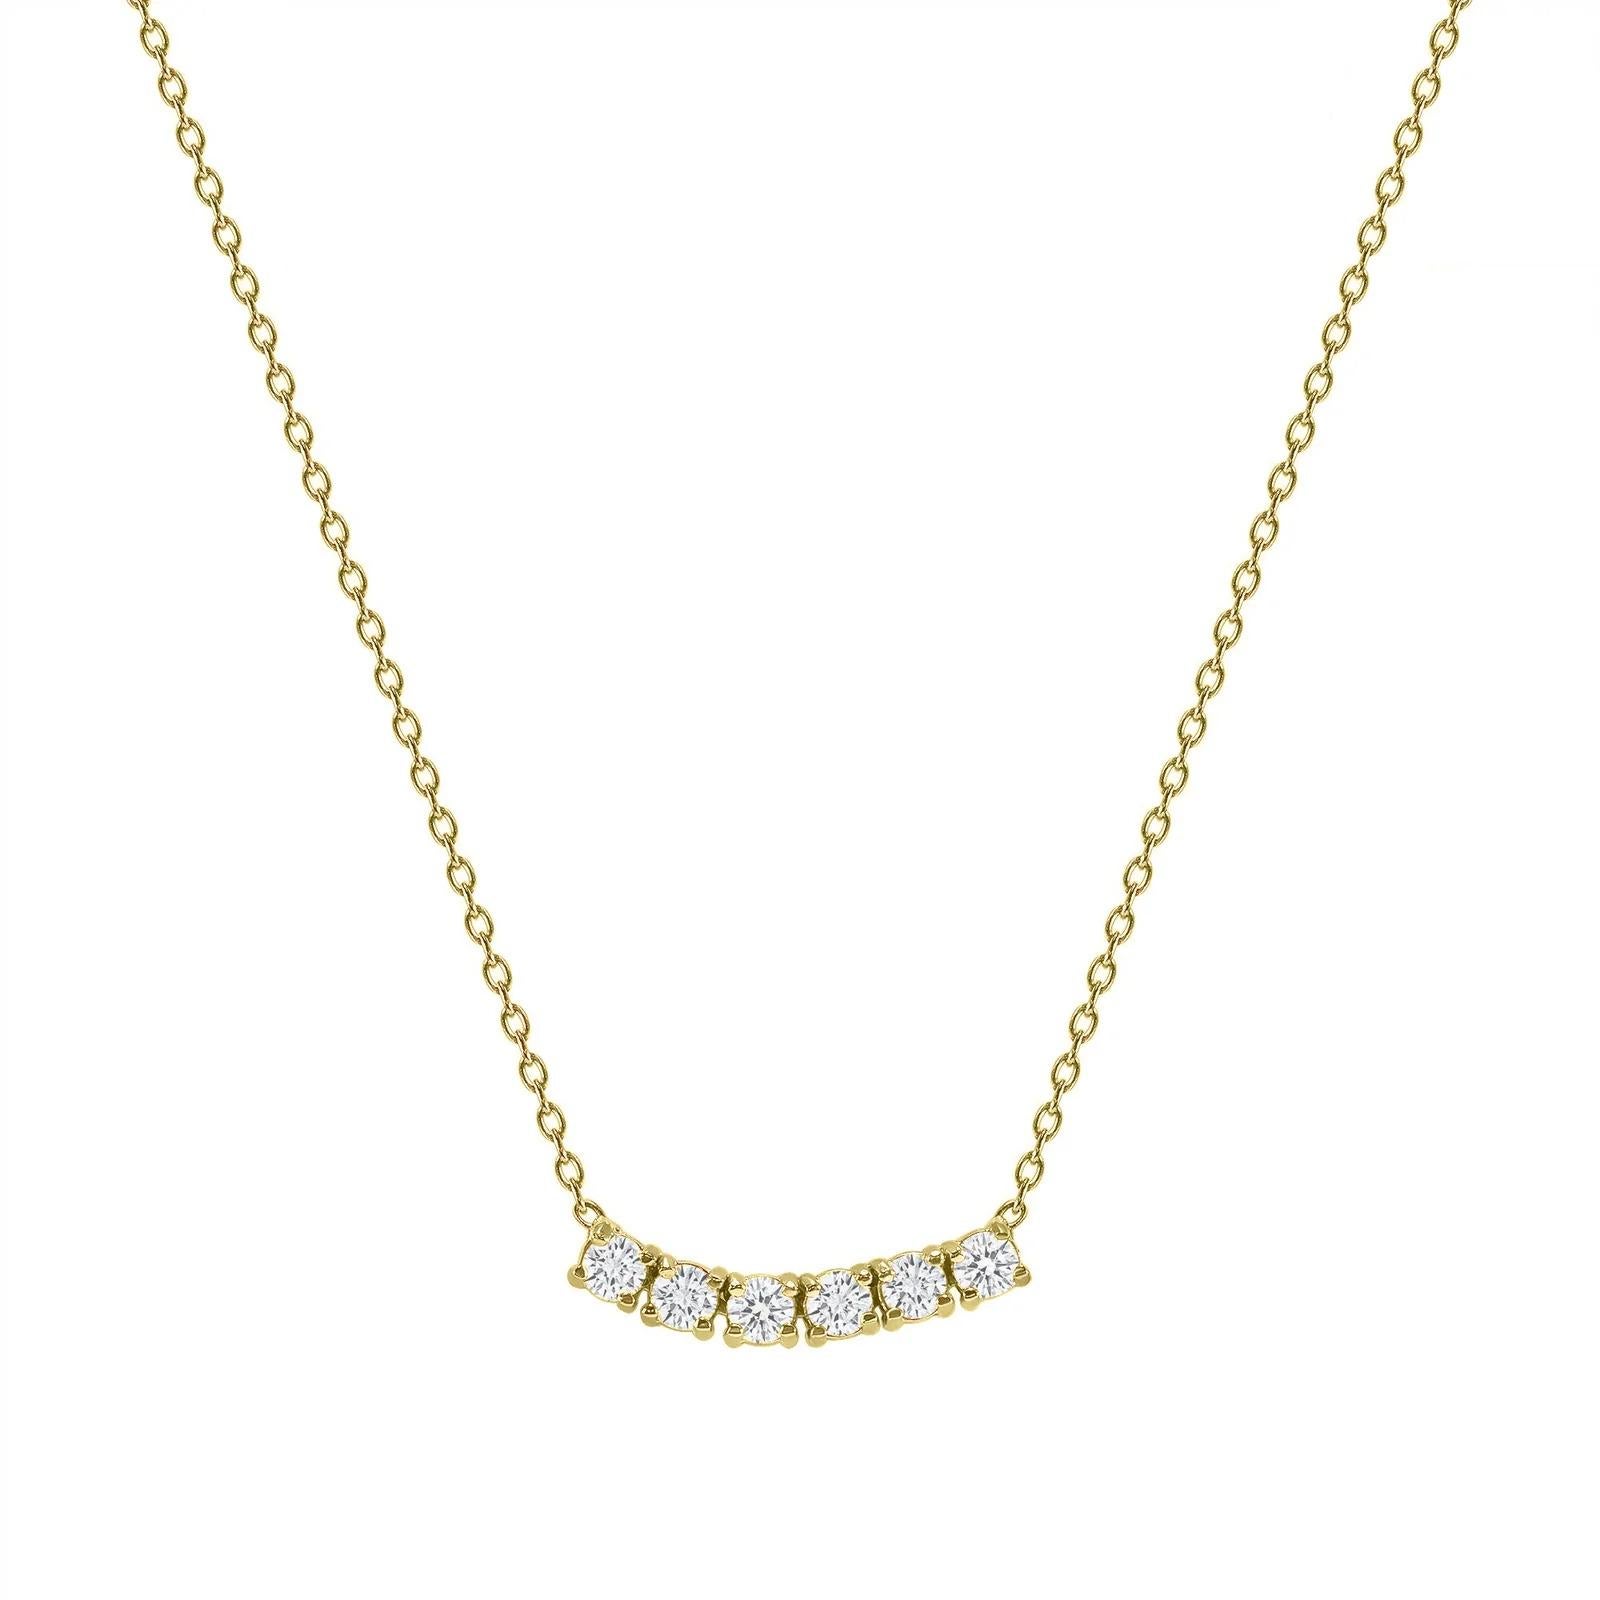 This petite, curved diamond necklace is crafted with gorgeous 14k gold set with six round diamonds.  

Gold: 14k 
Diamond Total Carats: 1.5 ct
Diamond Cut: Round (6 diamonds)
Diamond Clarity: VS
Diamond Color: F
Color: Yellow Gold
Necklace Length: